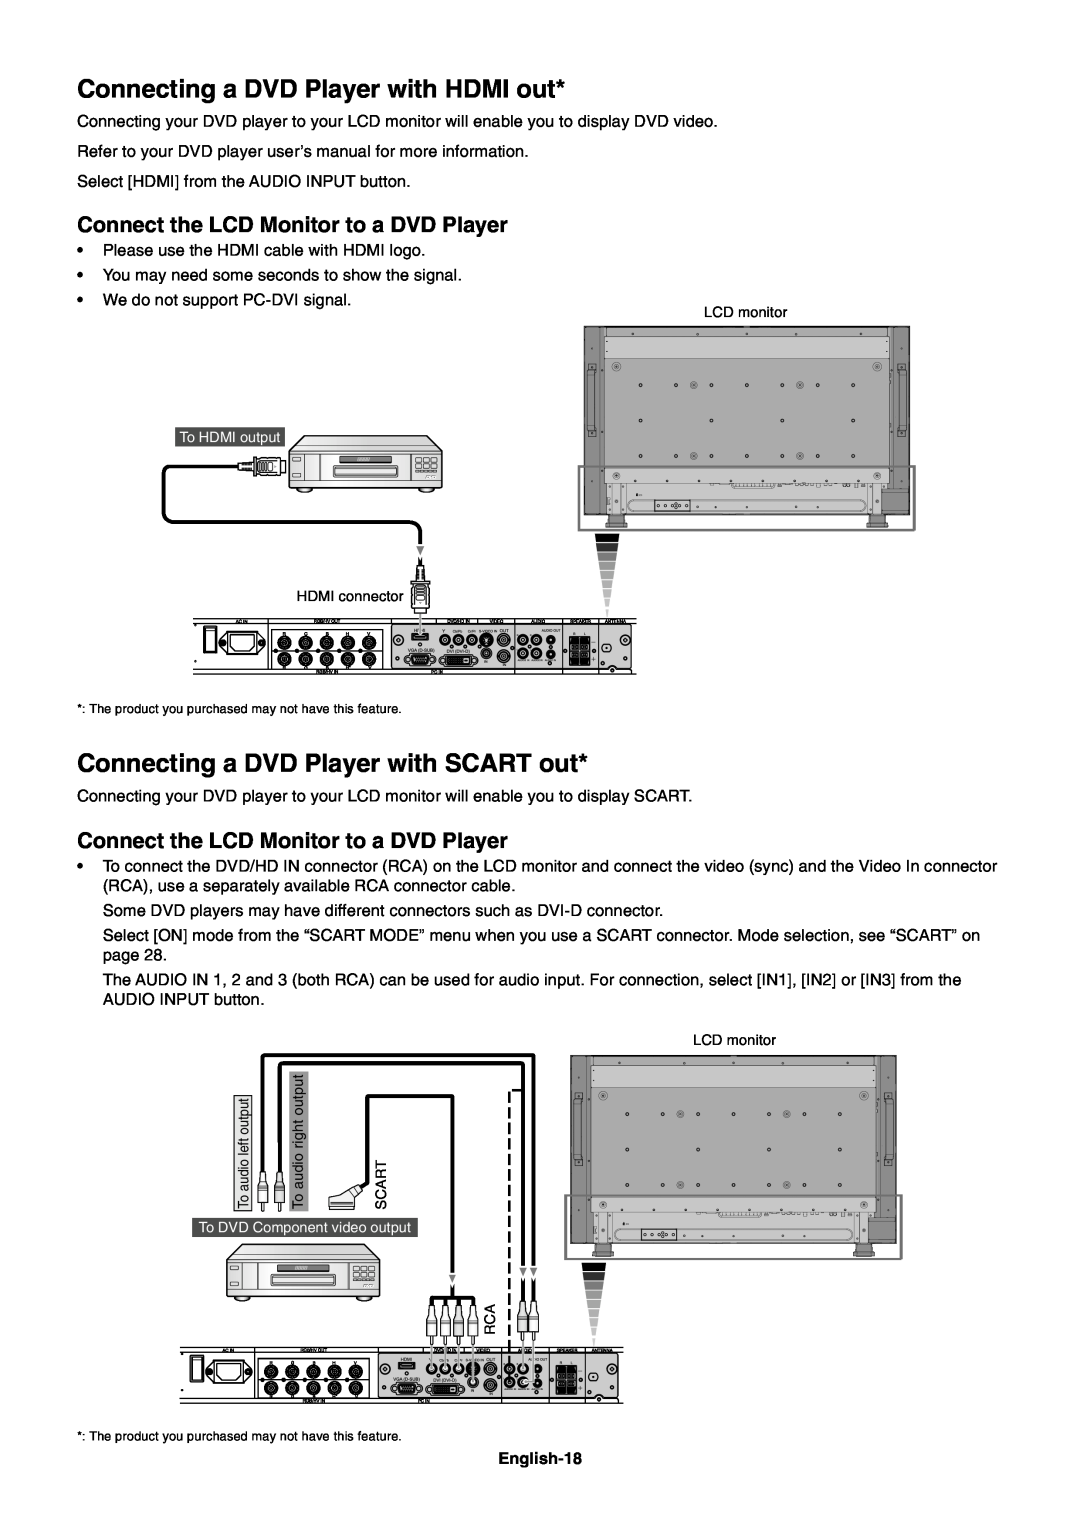 NEC LCD4020, LCD4620 user manual Connecting a DVD Player with HDMI out, Connecting a DVD Player with SCART out, English-18 